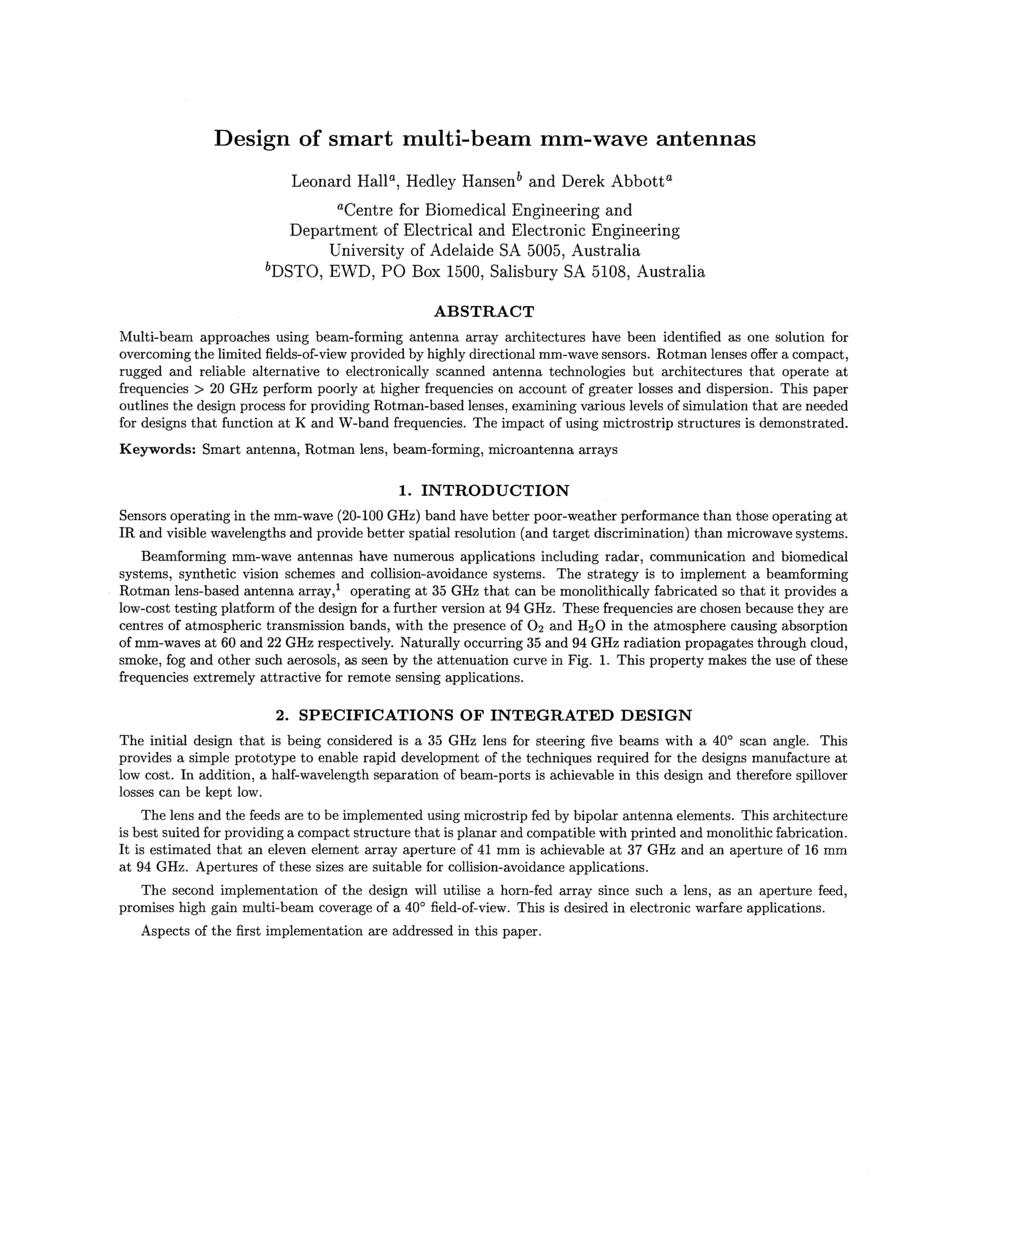 Design of smart multi-beam mm-wave antennas Leonard HaP, Hedley Hansen and Derek Abbott' acentre for Biomedical Engineering and Department of Electrical and Electronic Engineering University of